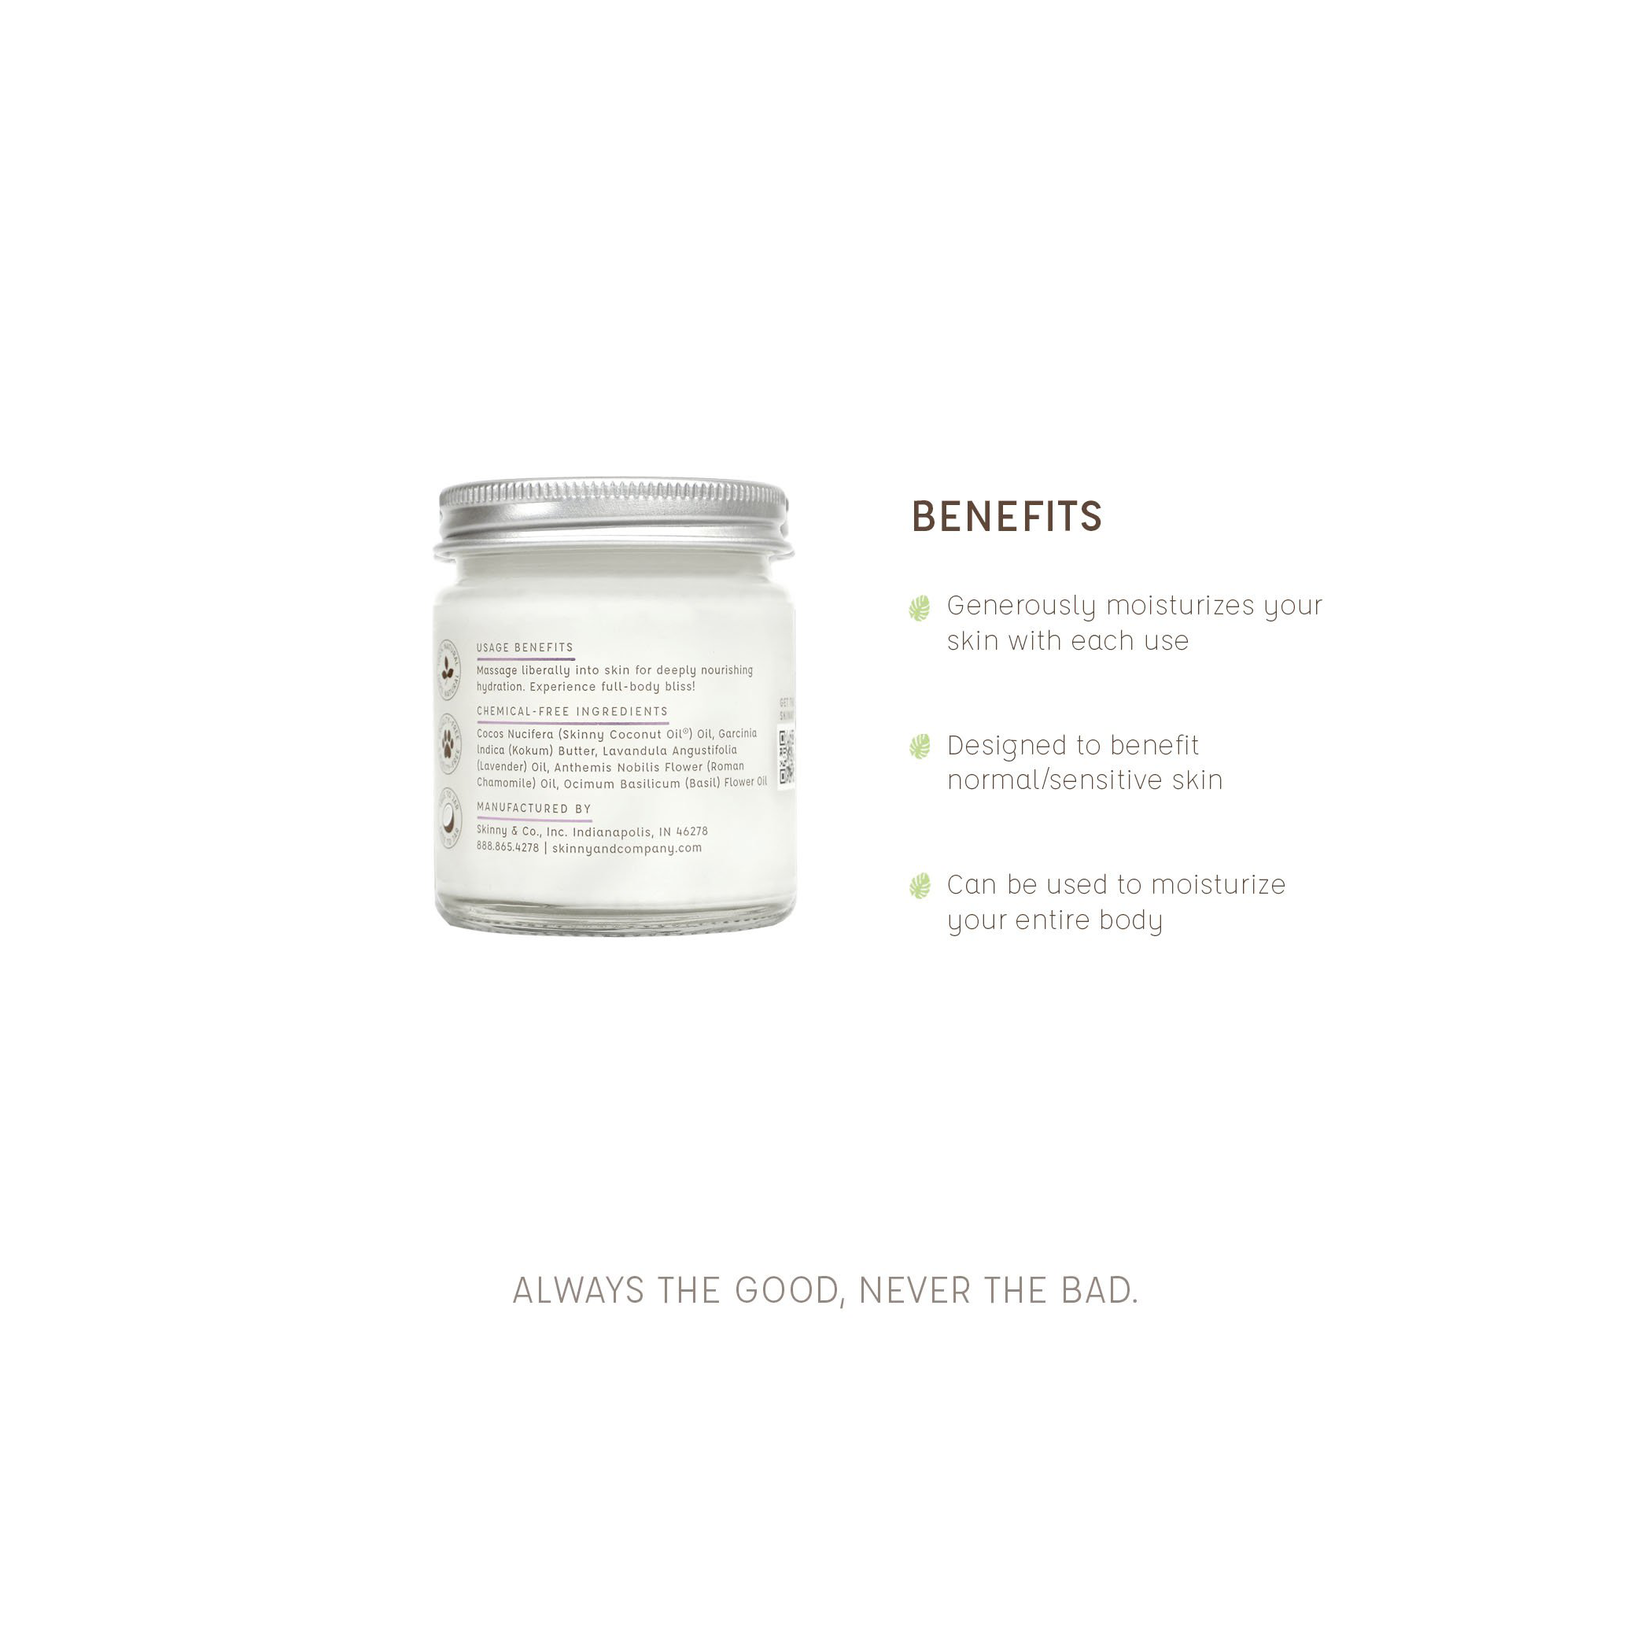 The Skinny Essential Body Butter